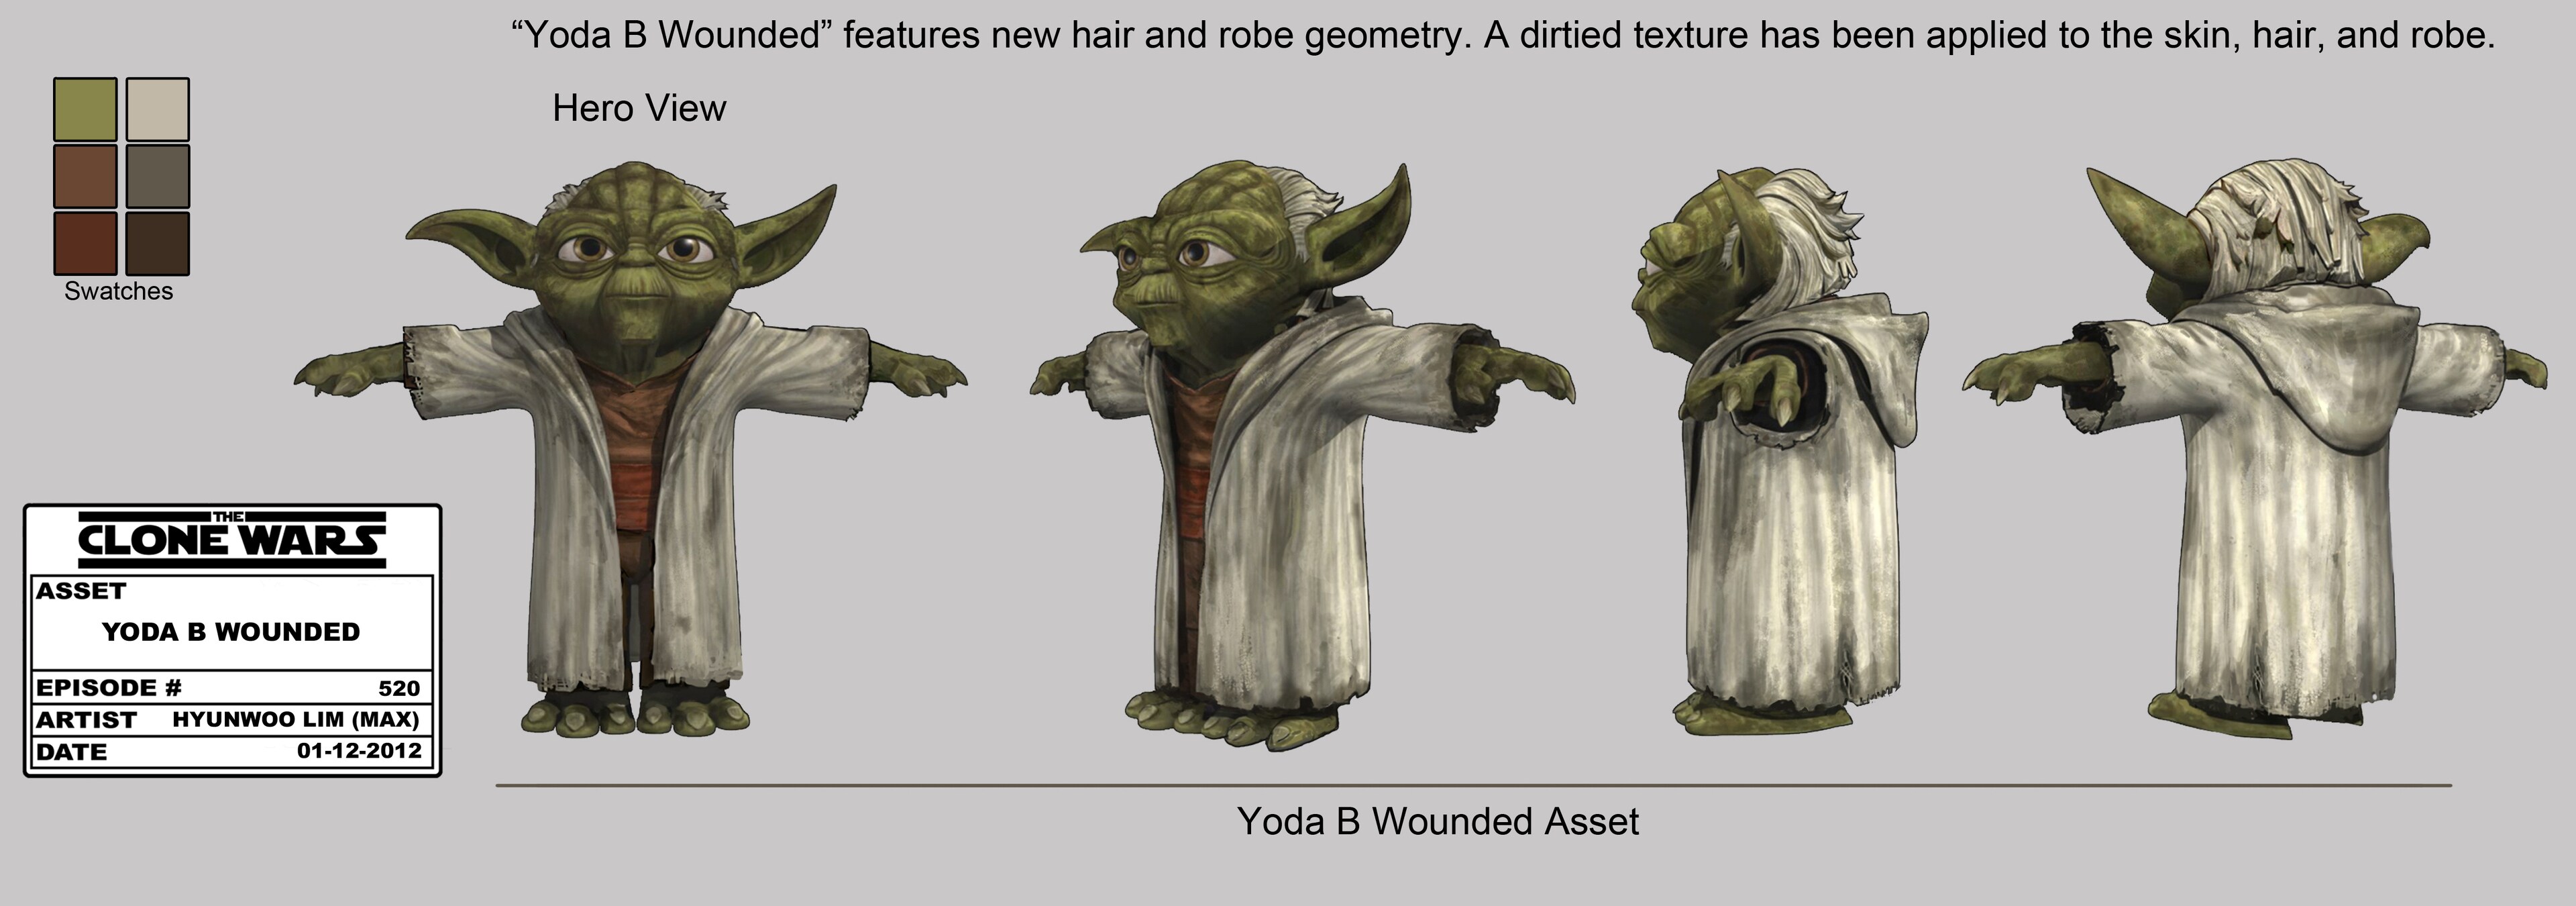 Yoda wounded illustration by Hyunwoo Lim (dated January 12, 2012).
